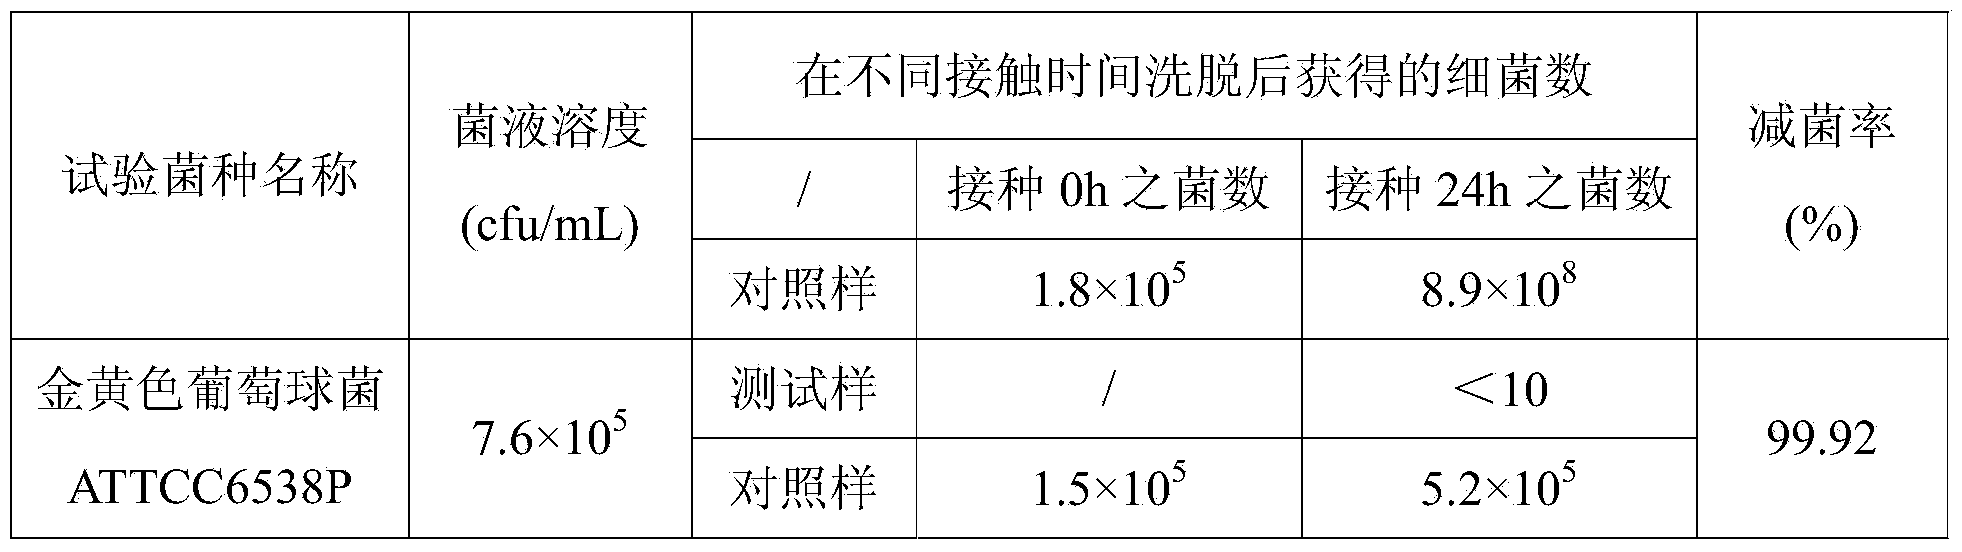 Nano-iron and graphene compound purification material and preparation method and application of nano-iron and graphene compound purification material